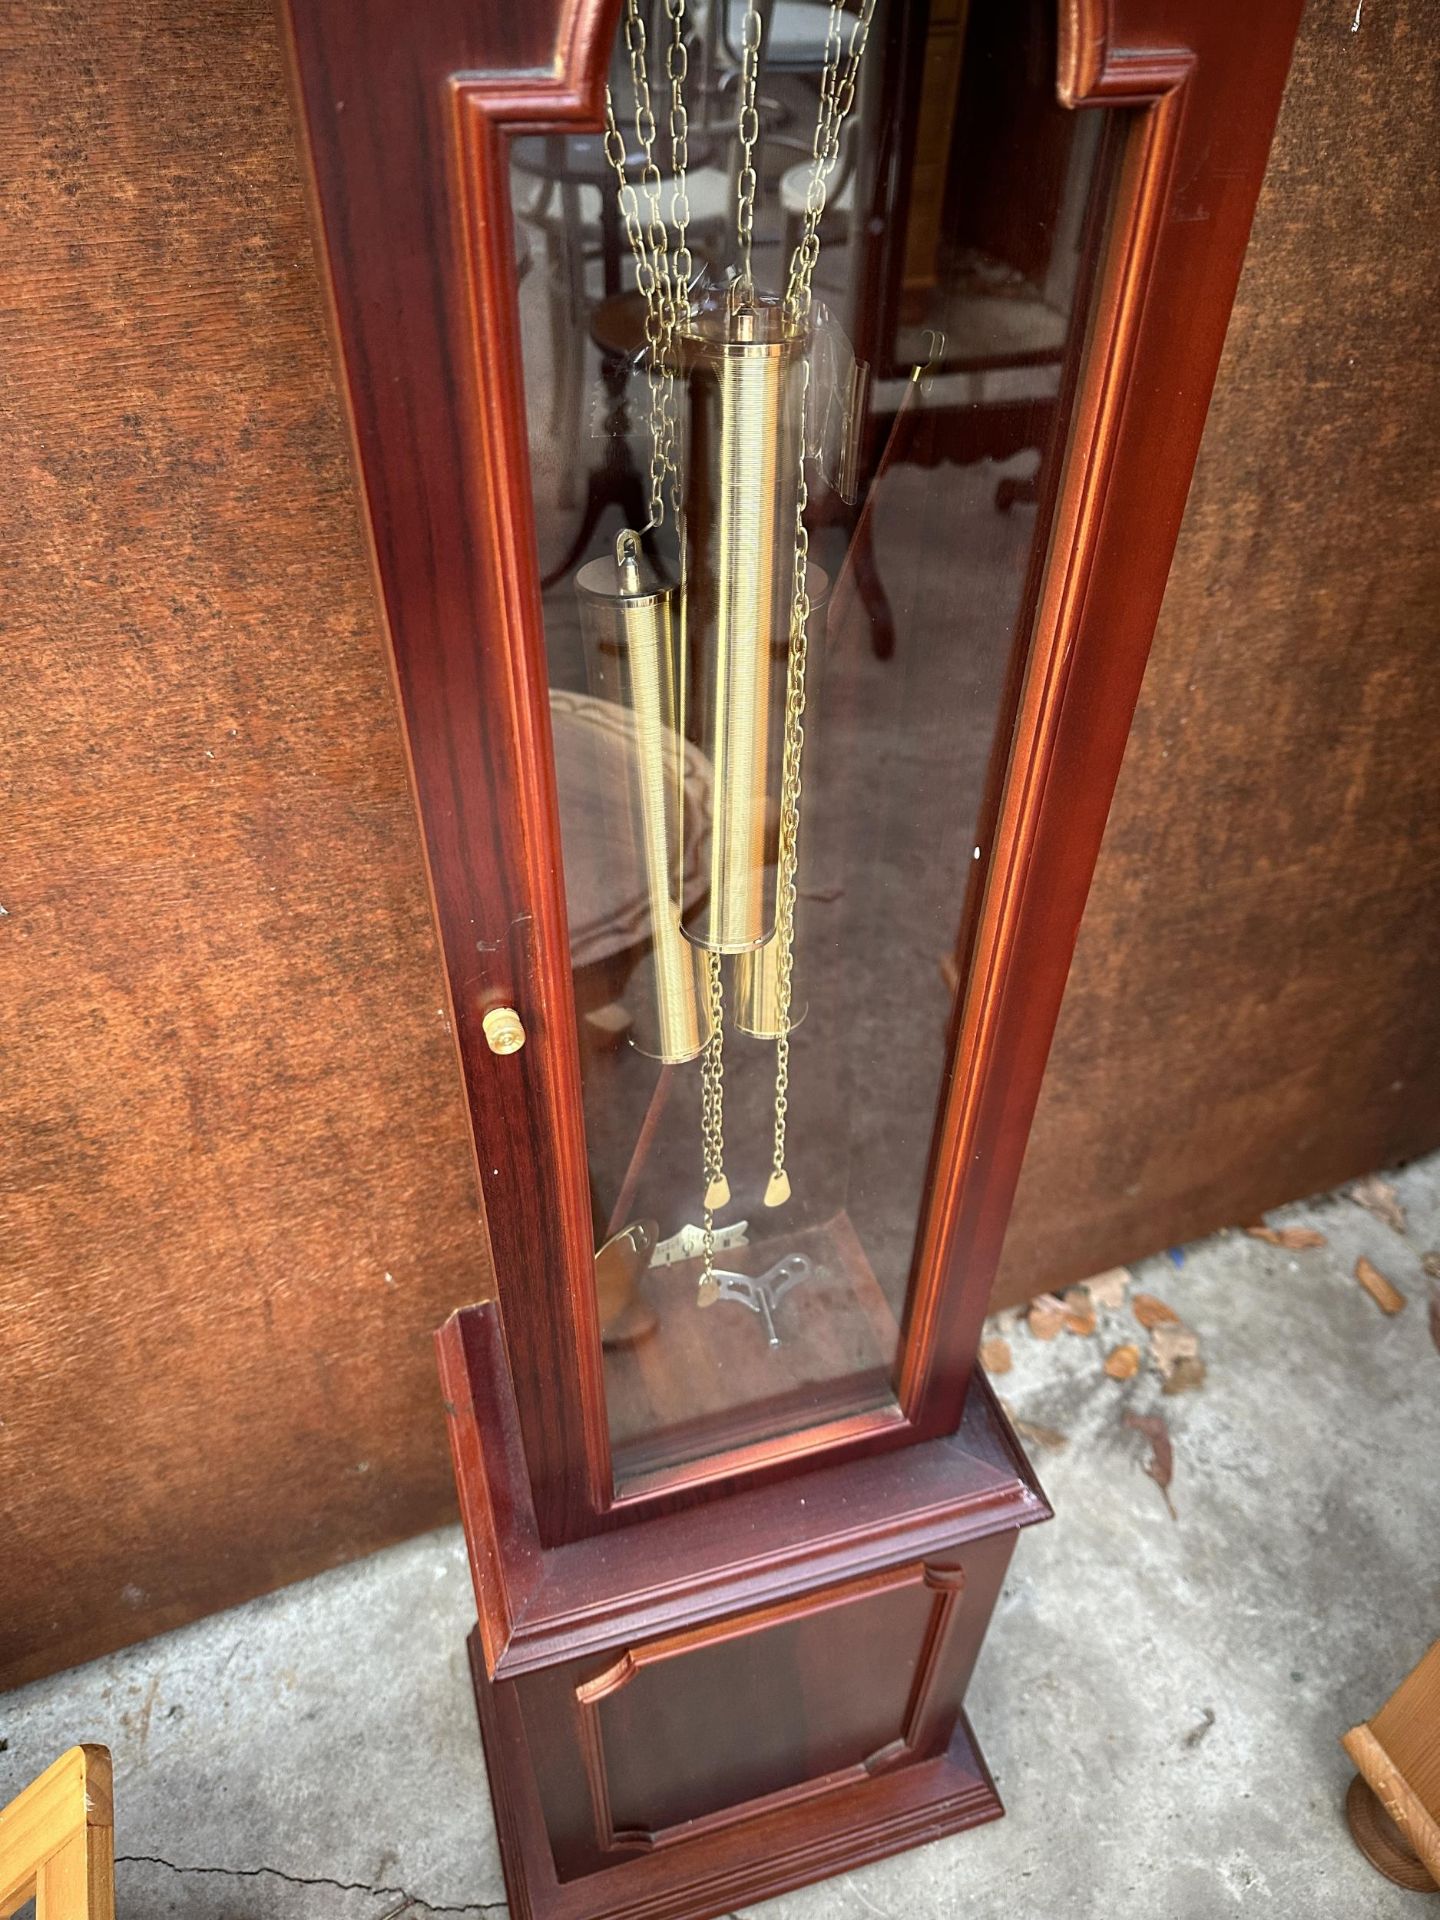 A TEMPUS FUGIT 31 DAY GRANDMOTHER CLOCK WITH GLASS DOOR AND THREE WEIGHTS - Image 3 of 3